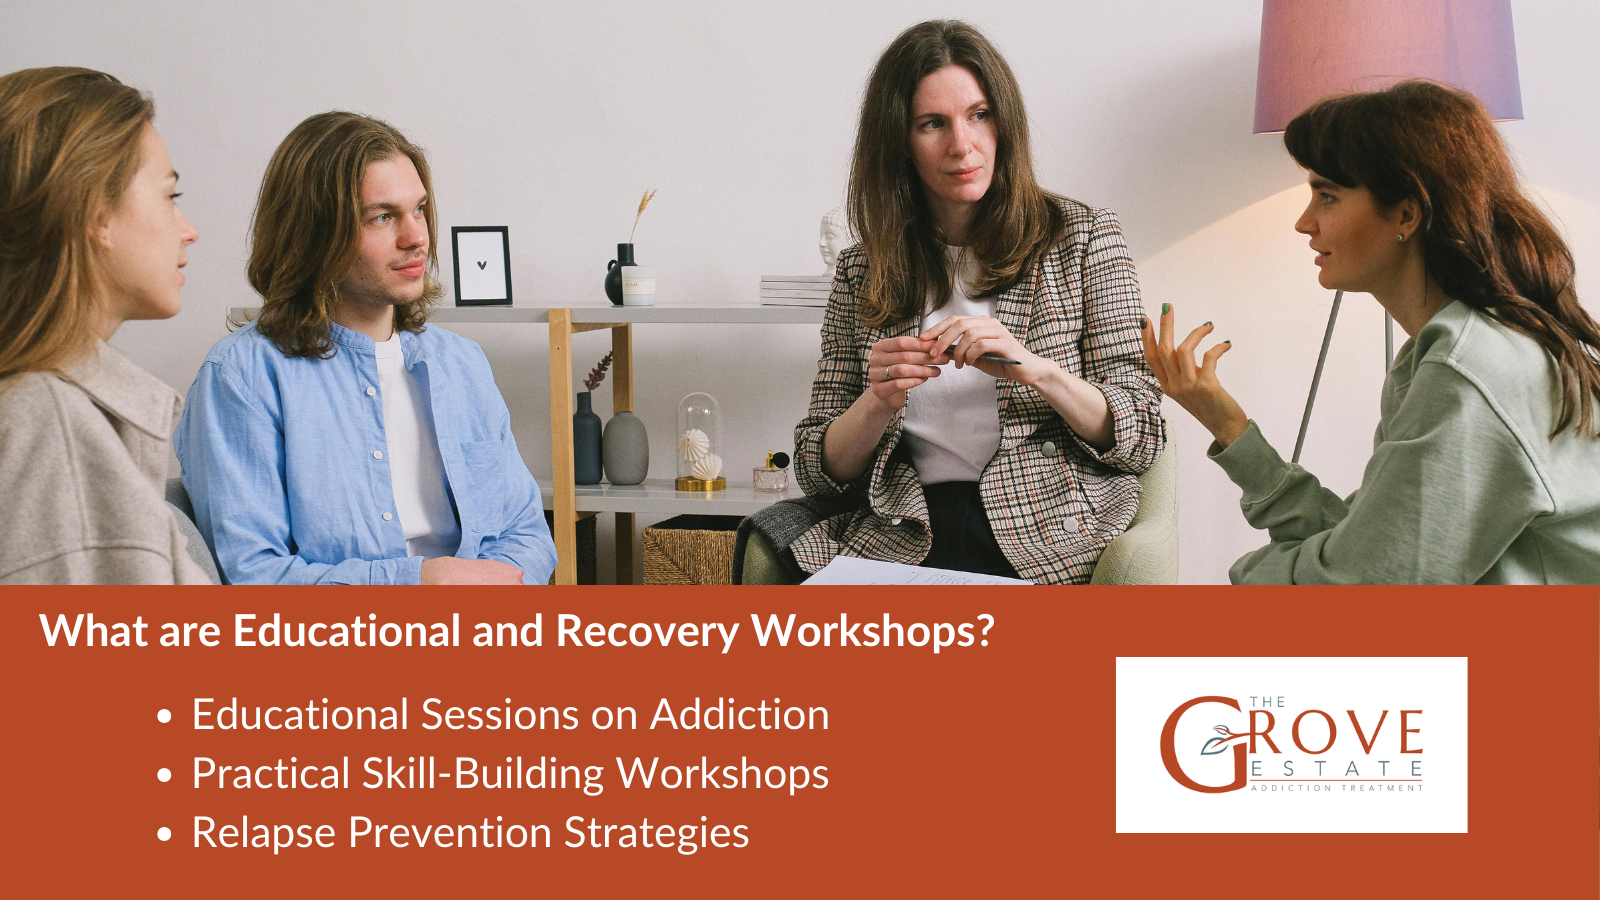 Educational and Recovery Workshops